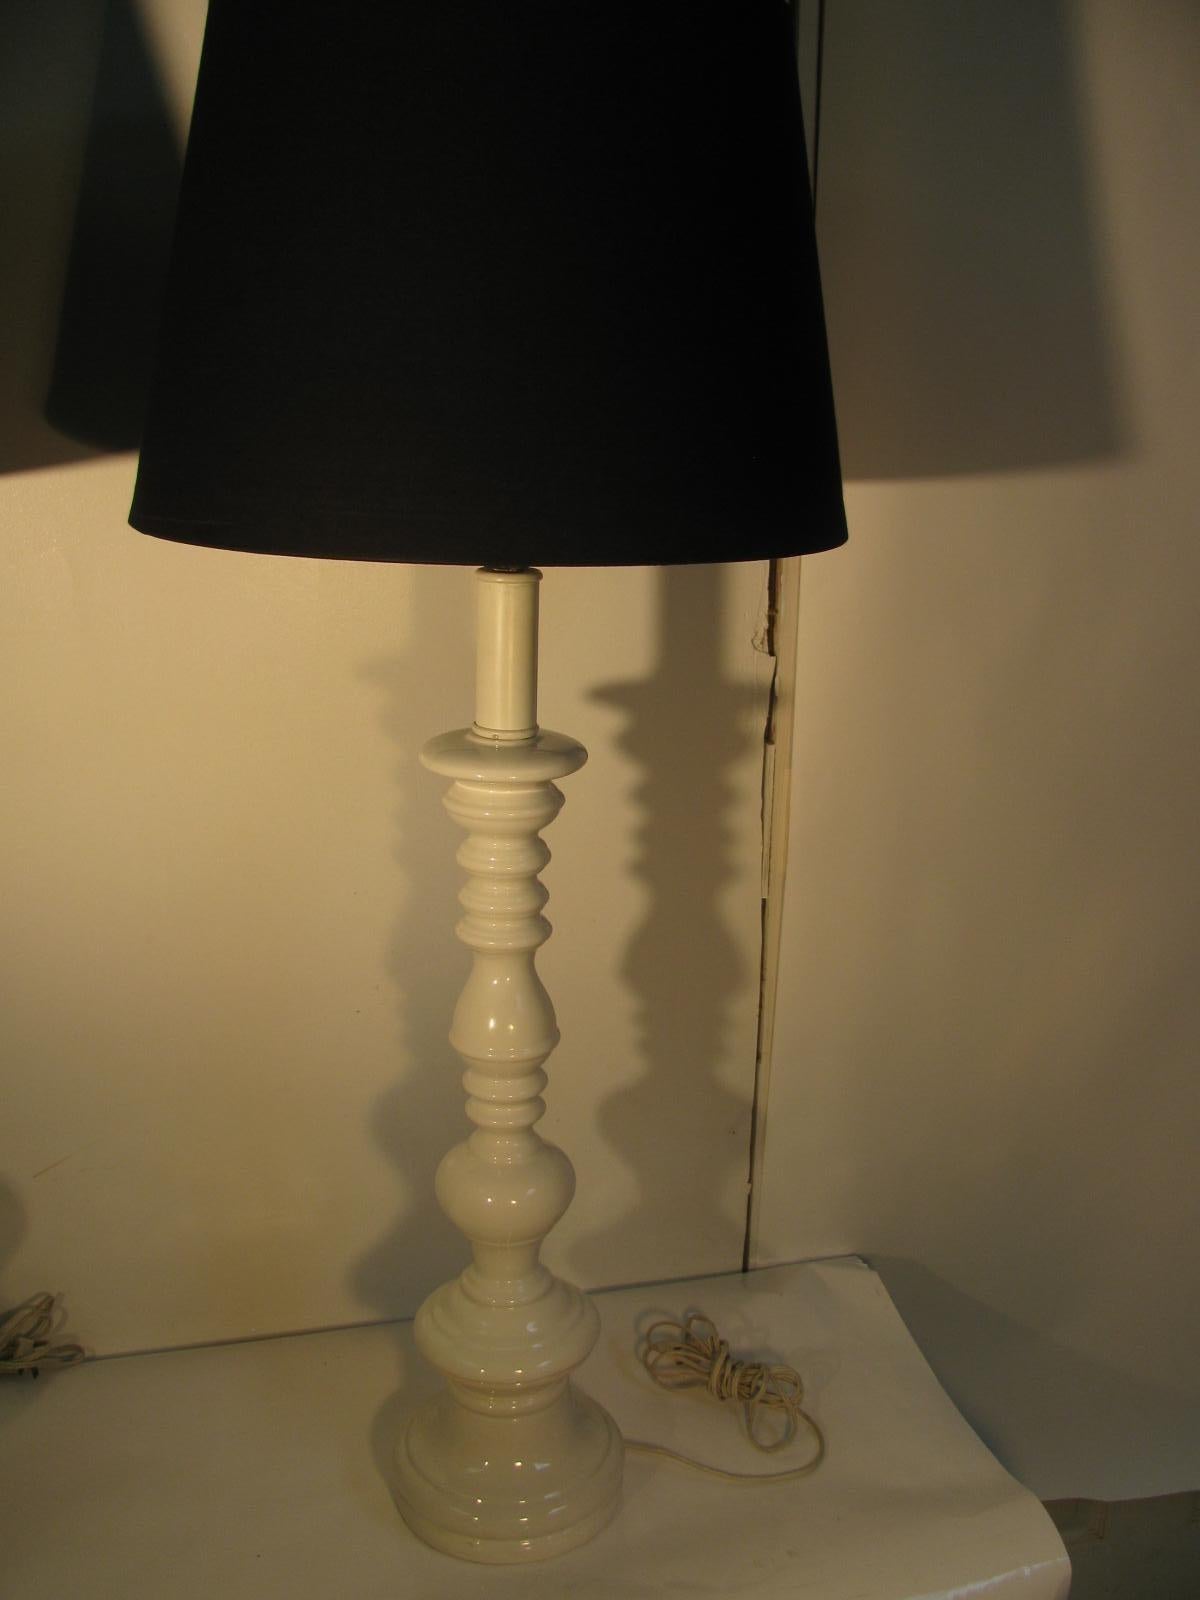 Pair of Tall Mid-Century Modern Classical Styled Porcelain Table Lamps In Good Condition For Sale In Port Jervis, NY